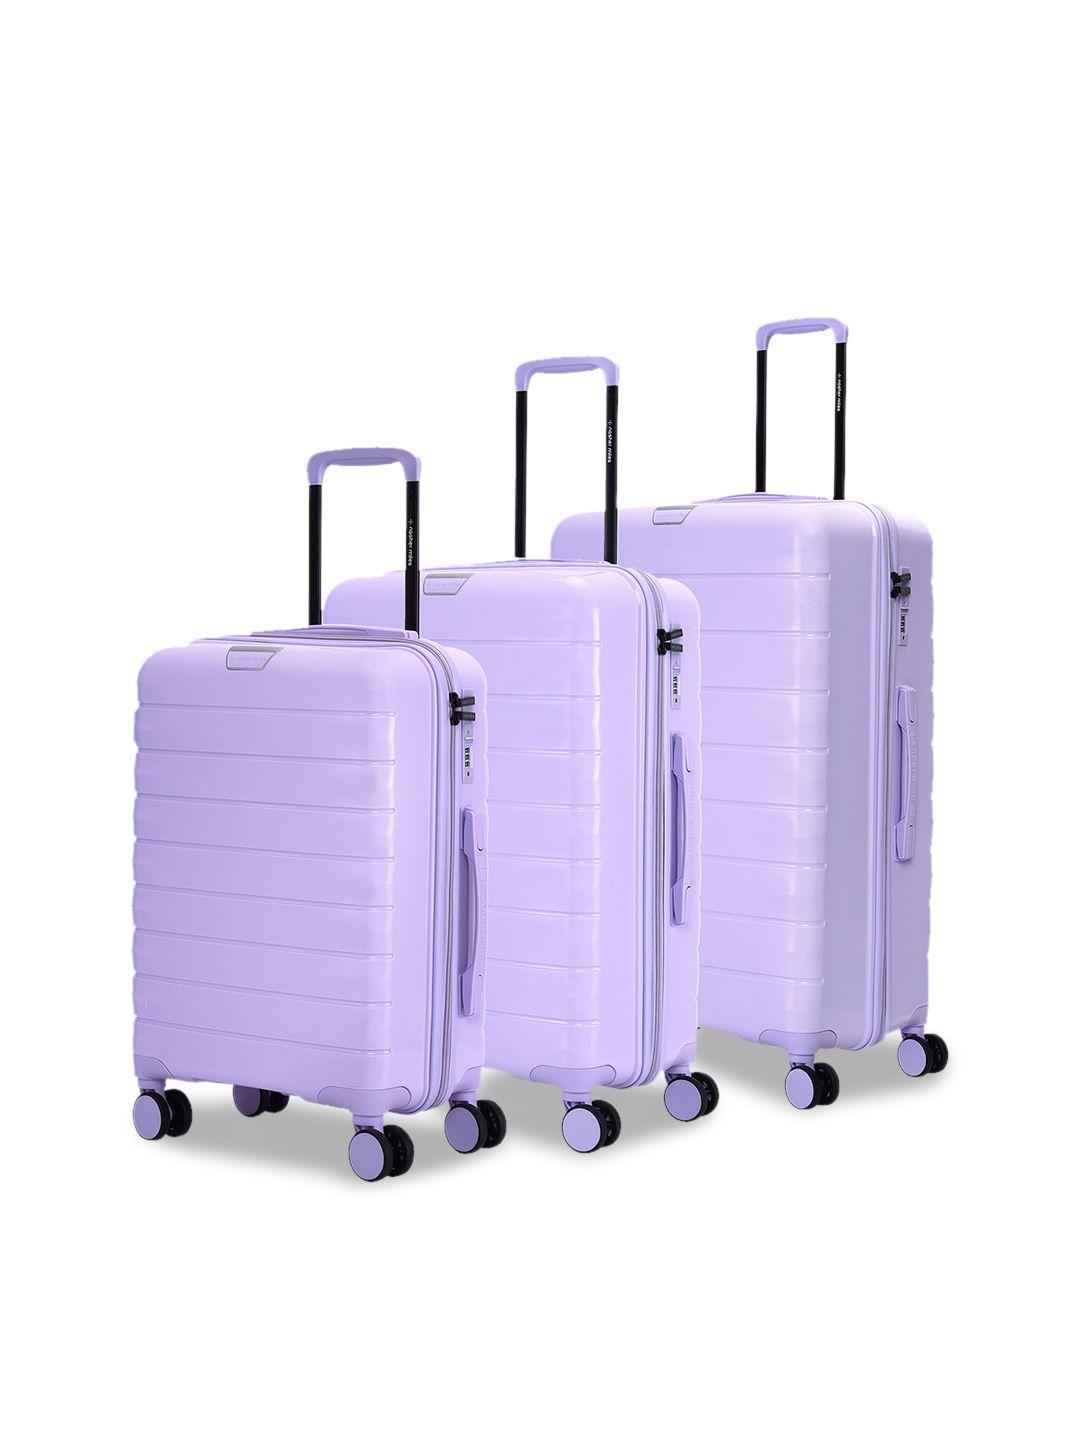 nasher miles vienna set of 3 water resistance hard-sided trolley suitcase